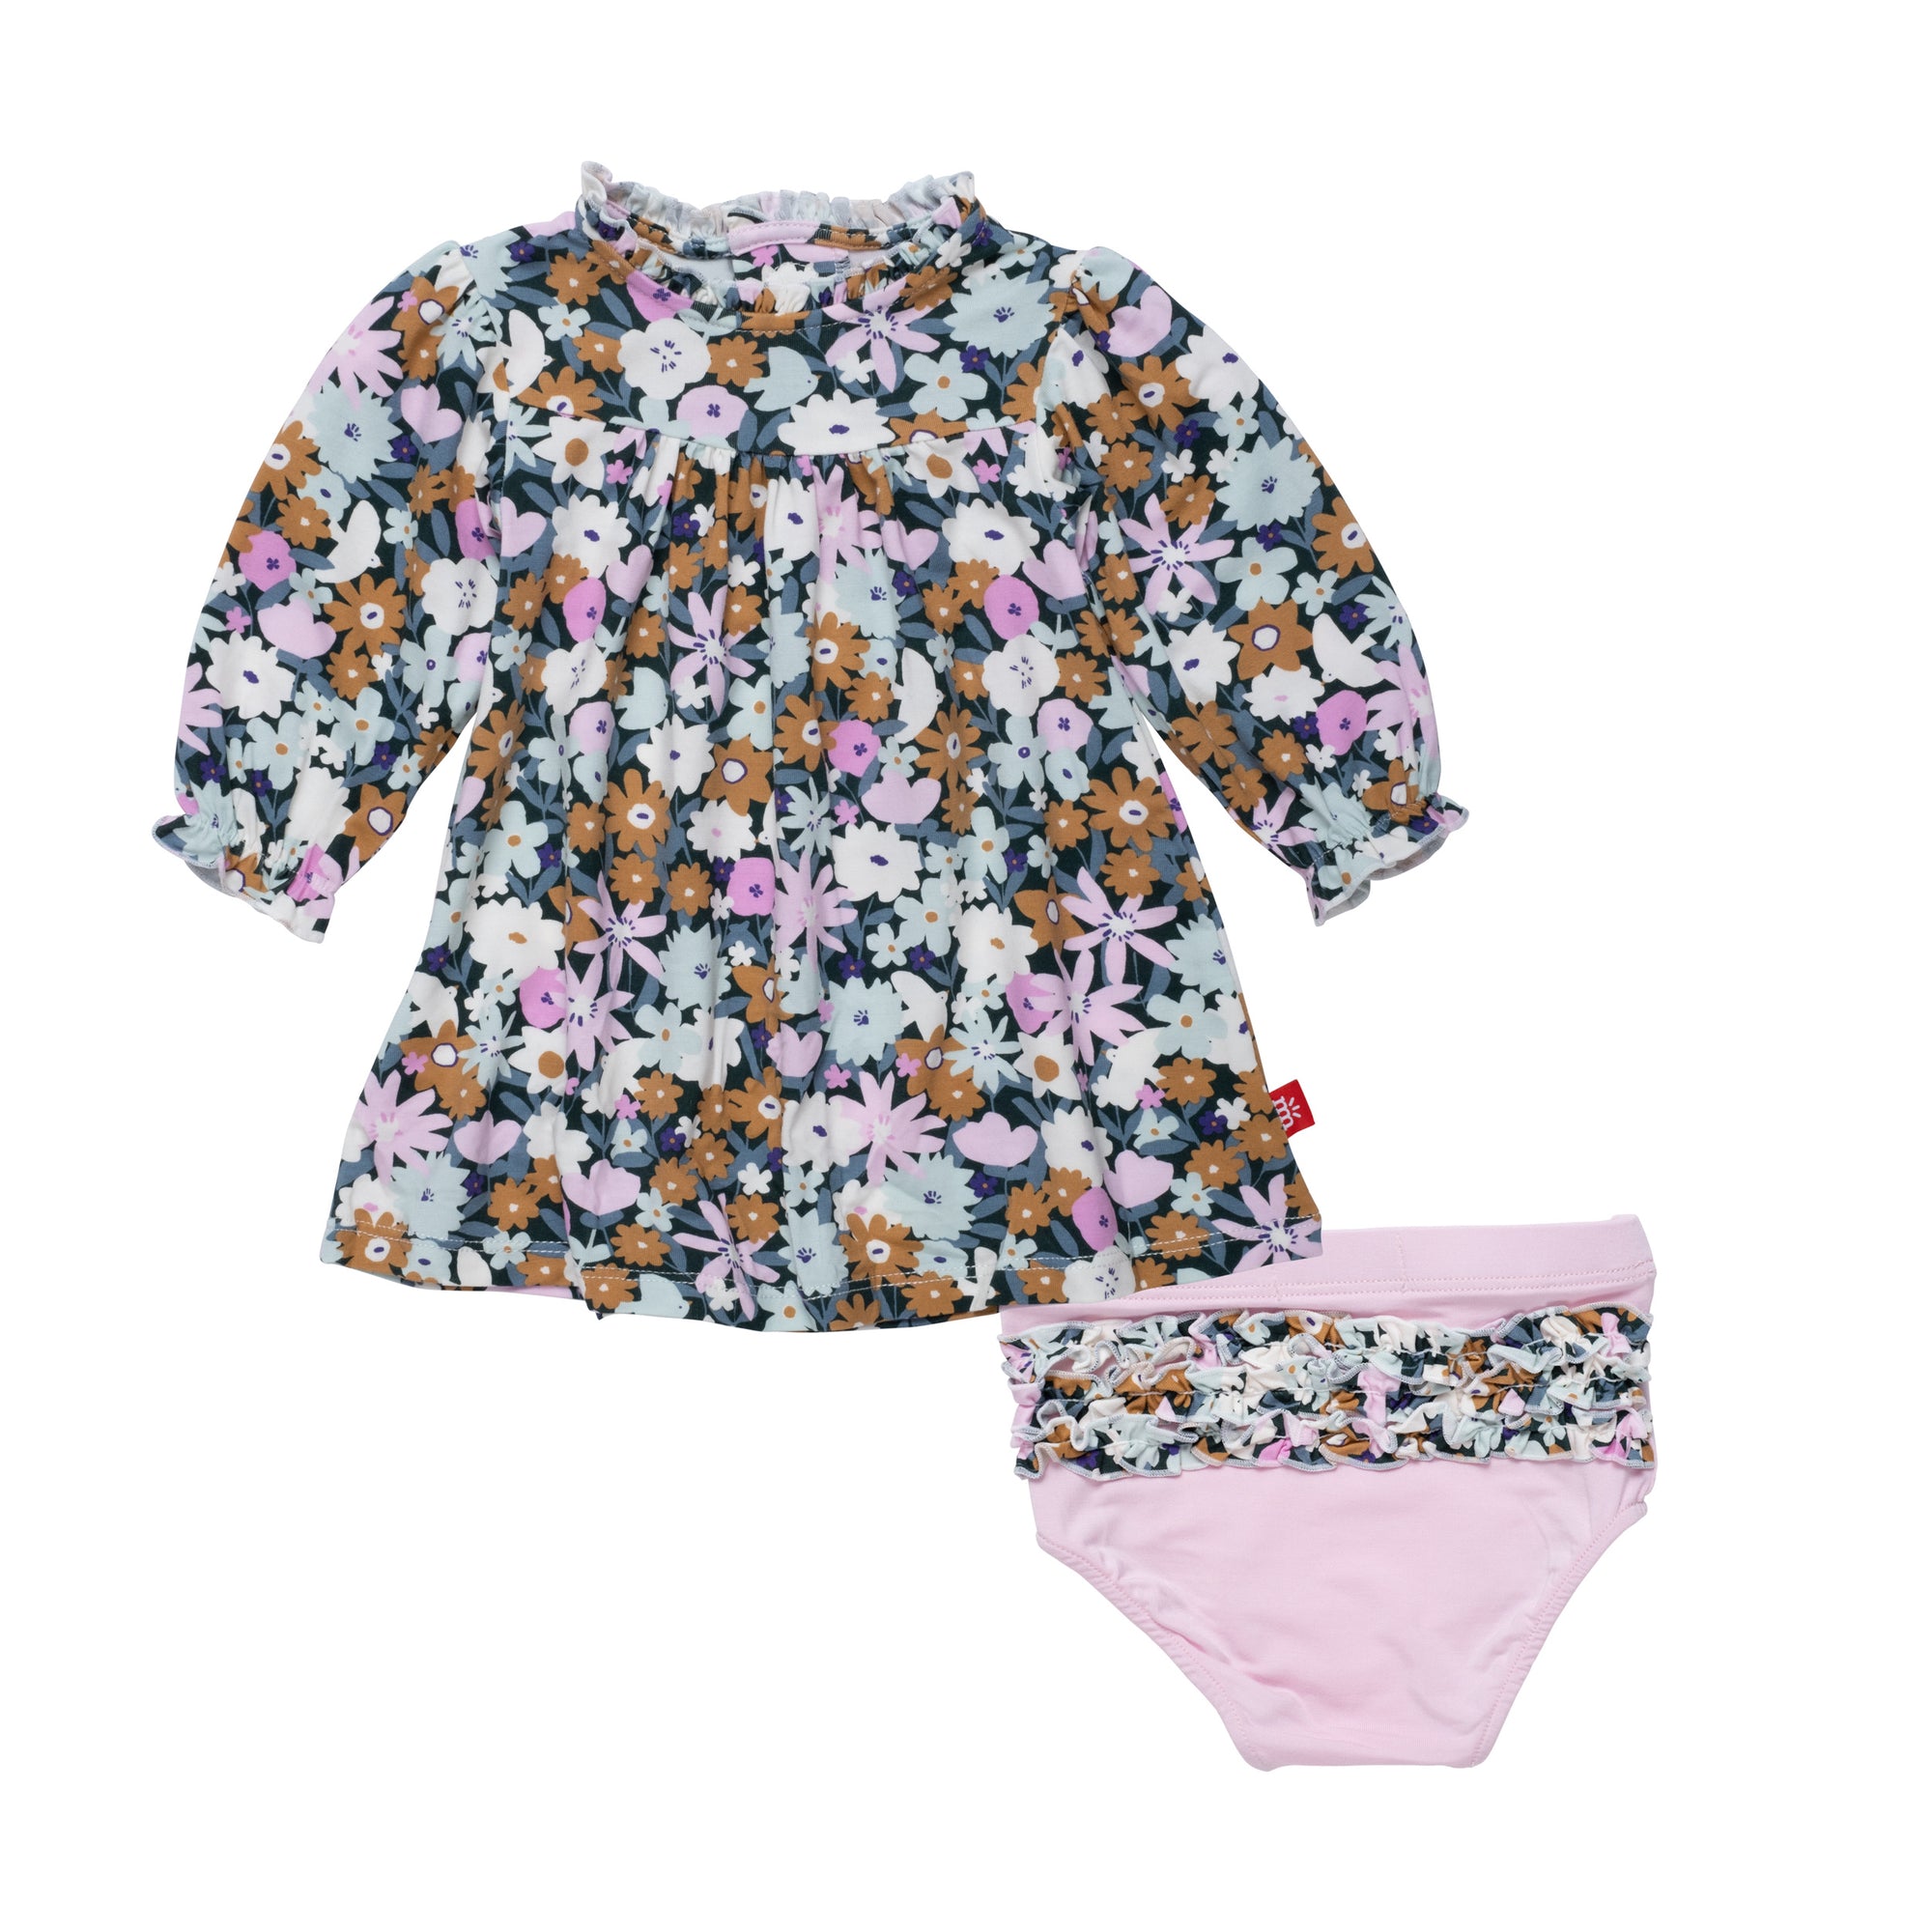 Magnetic Me Modal Magnetic Little Baby Dress + Diaper Cover Set / Finchley